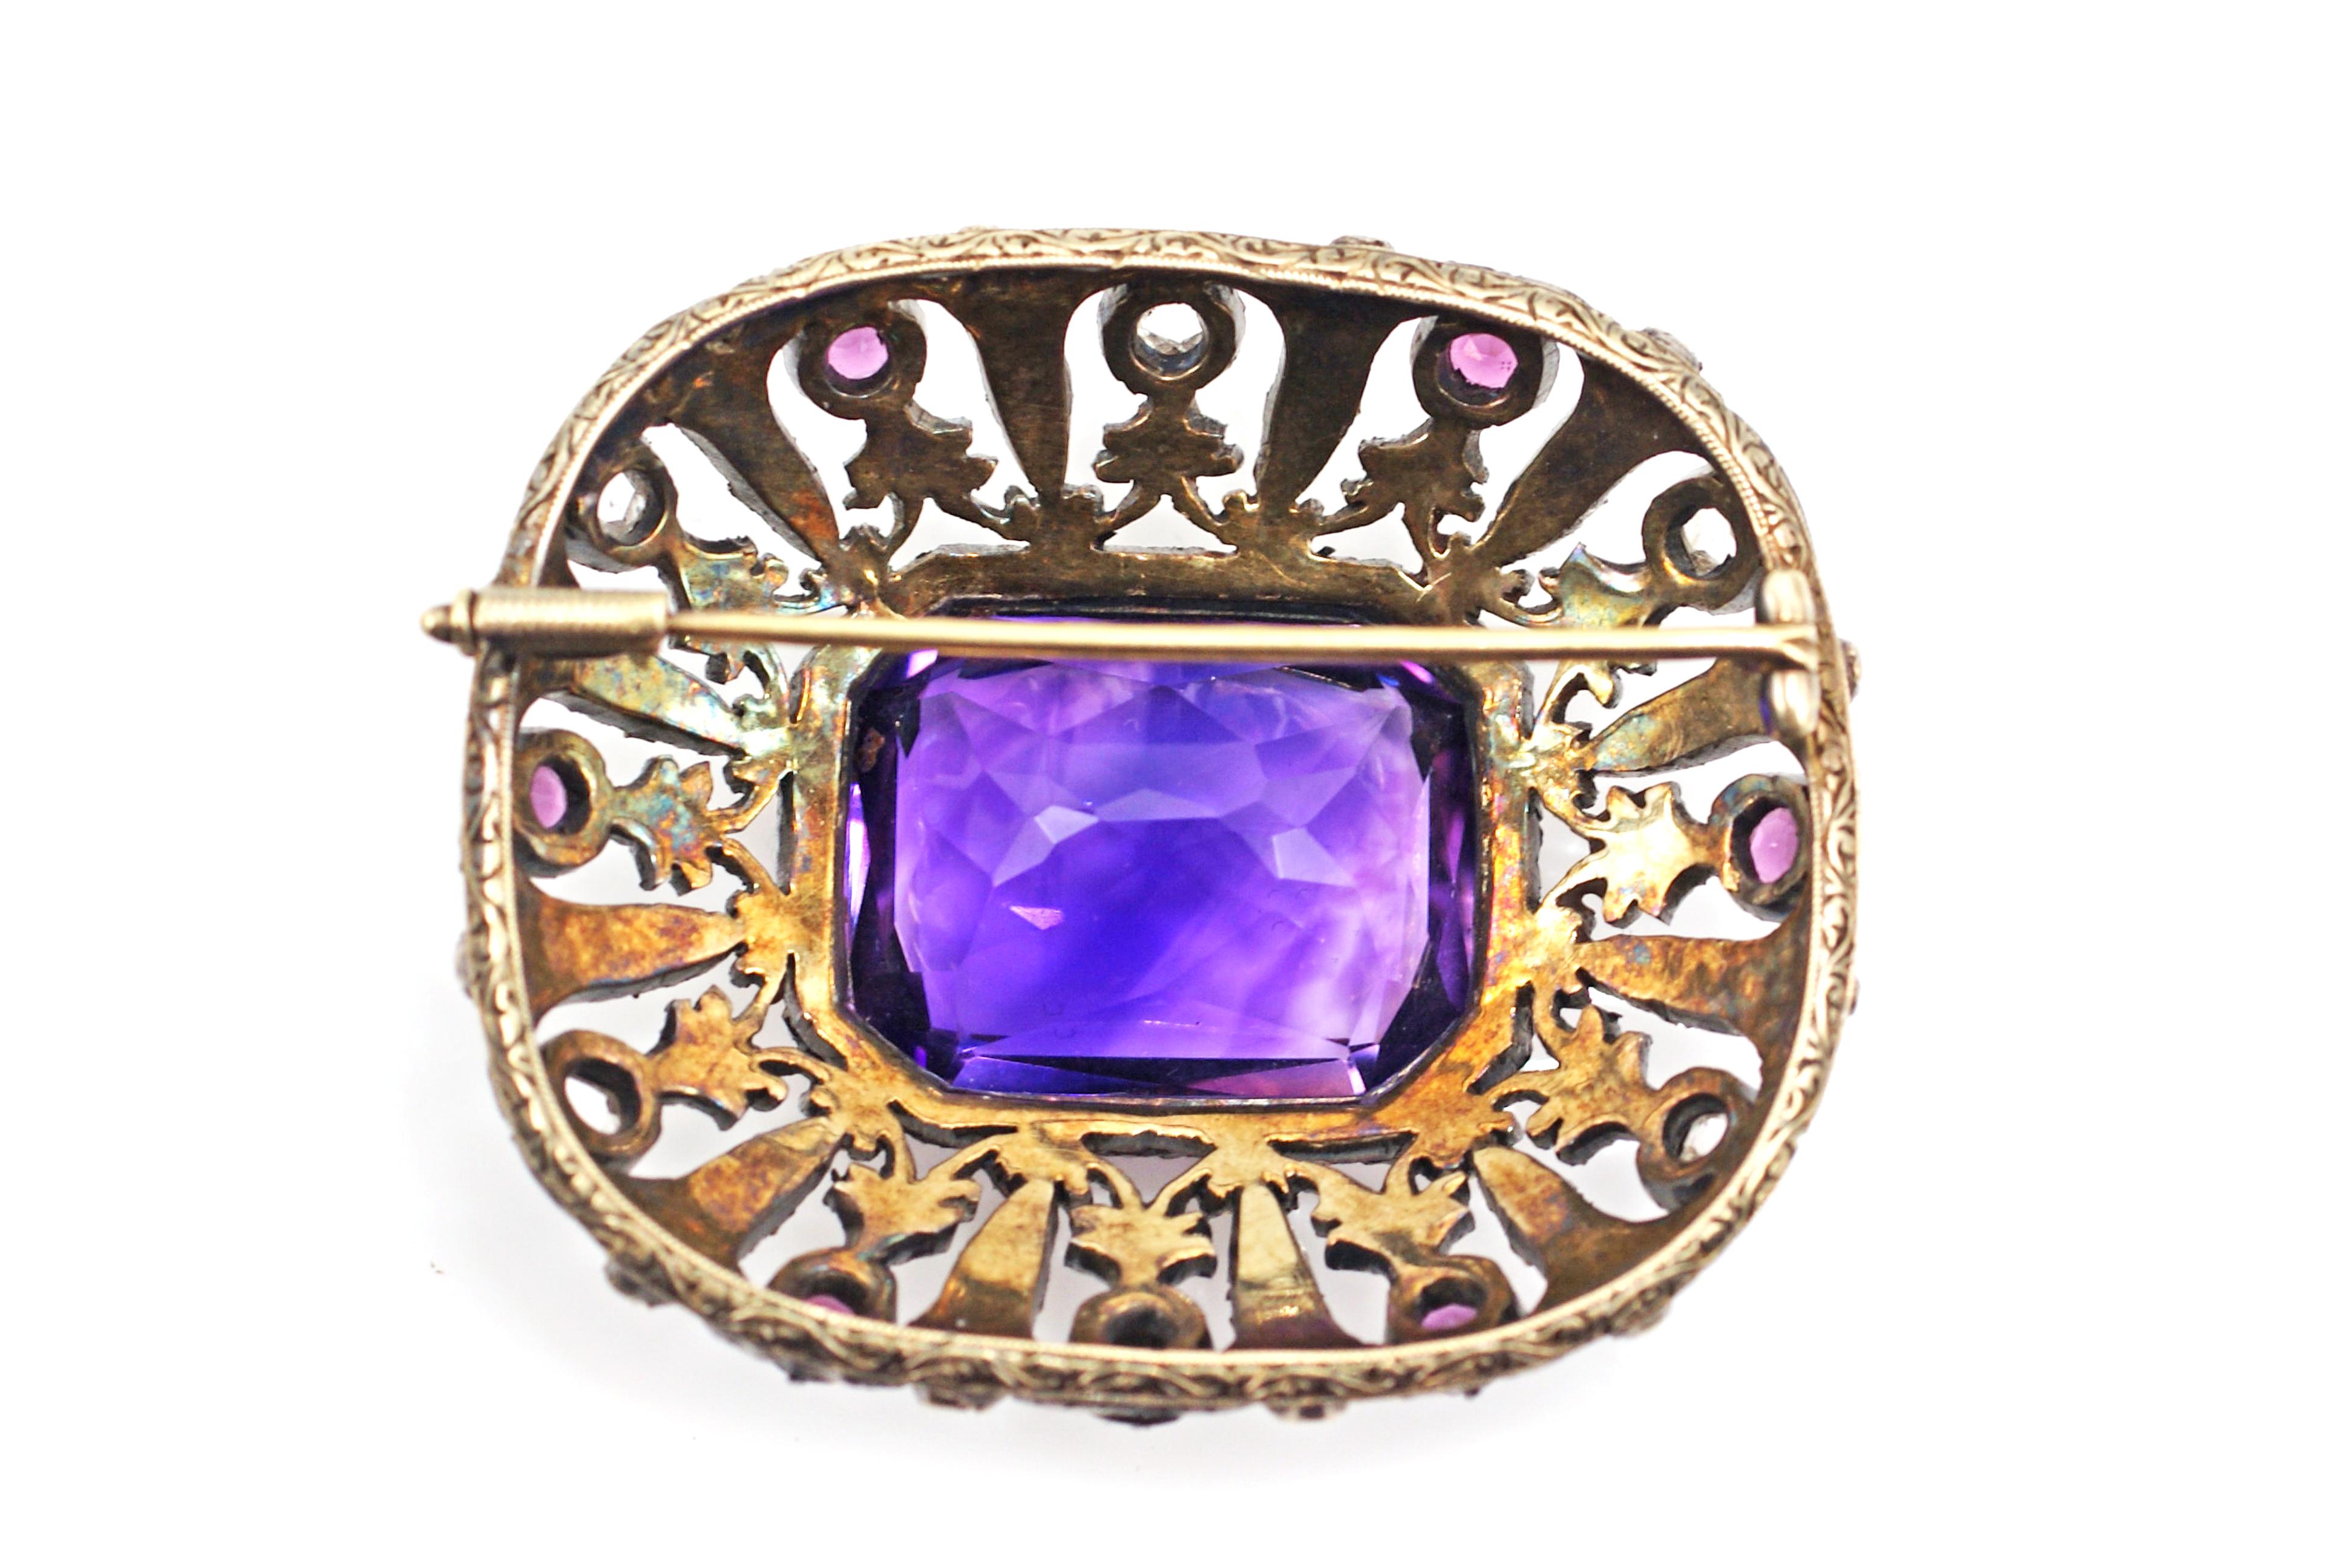 An amazing amethyst measured to weigh approximately 30 carats is the centerpiece of this incredible antique brooch. The faceted, extremely well-cut Amethyst displays a unique color saturation of deep, bright purple with slight shimmers. The Amethyst